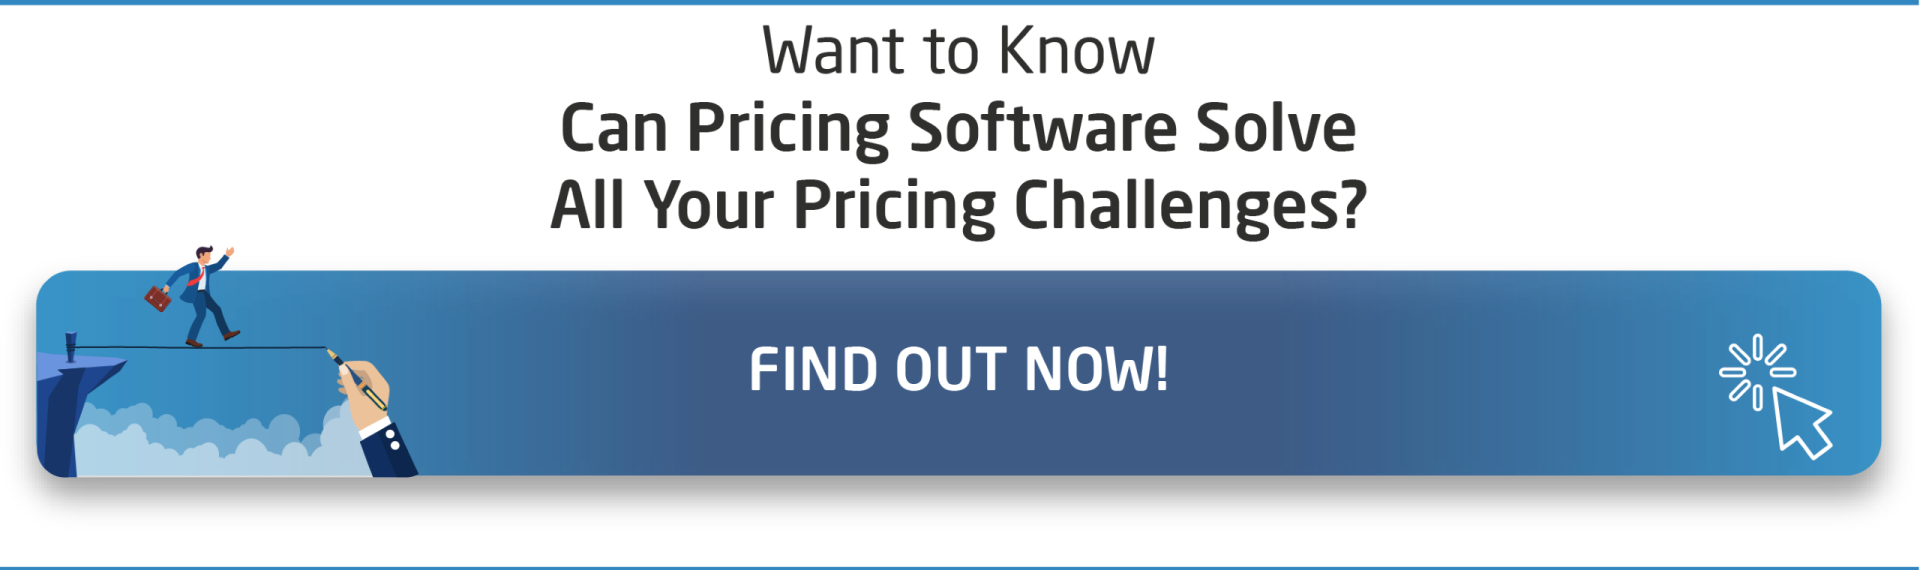 CTA-Can-Pricing-Software-Solve-All-Your-Pricing-Challenges